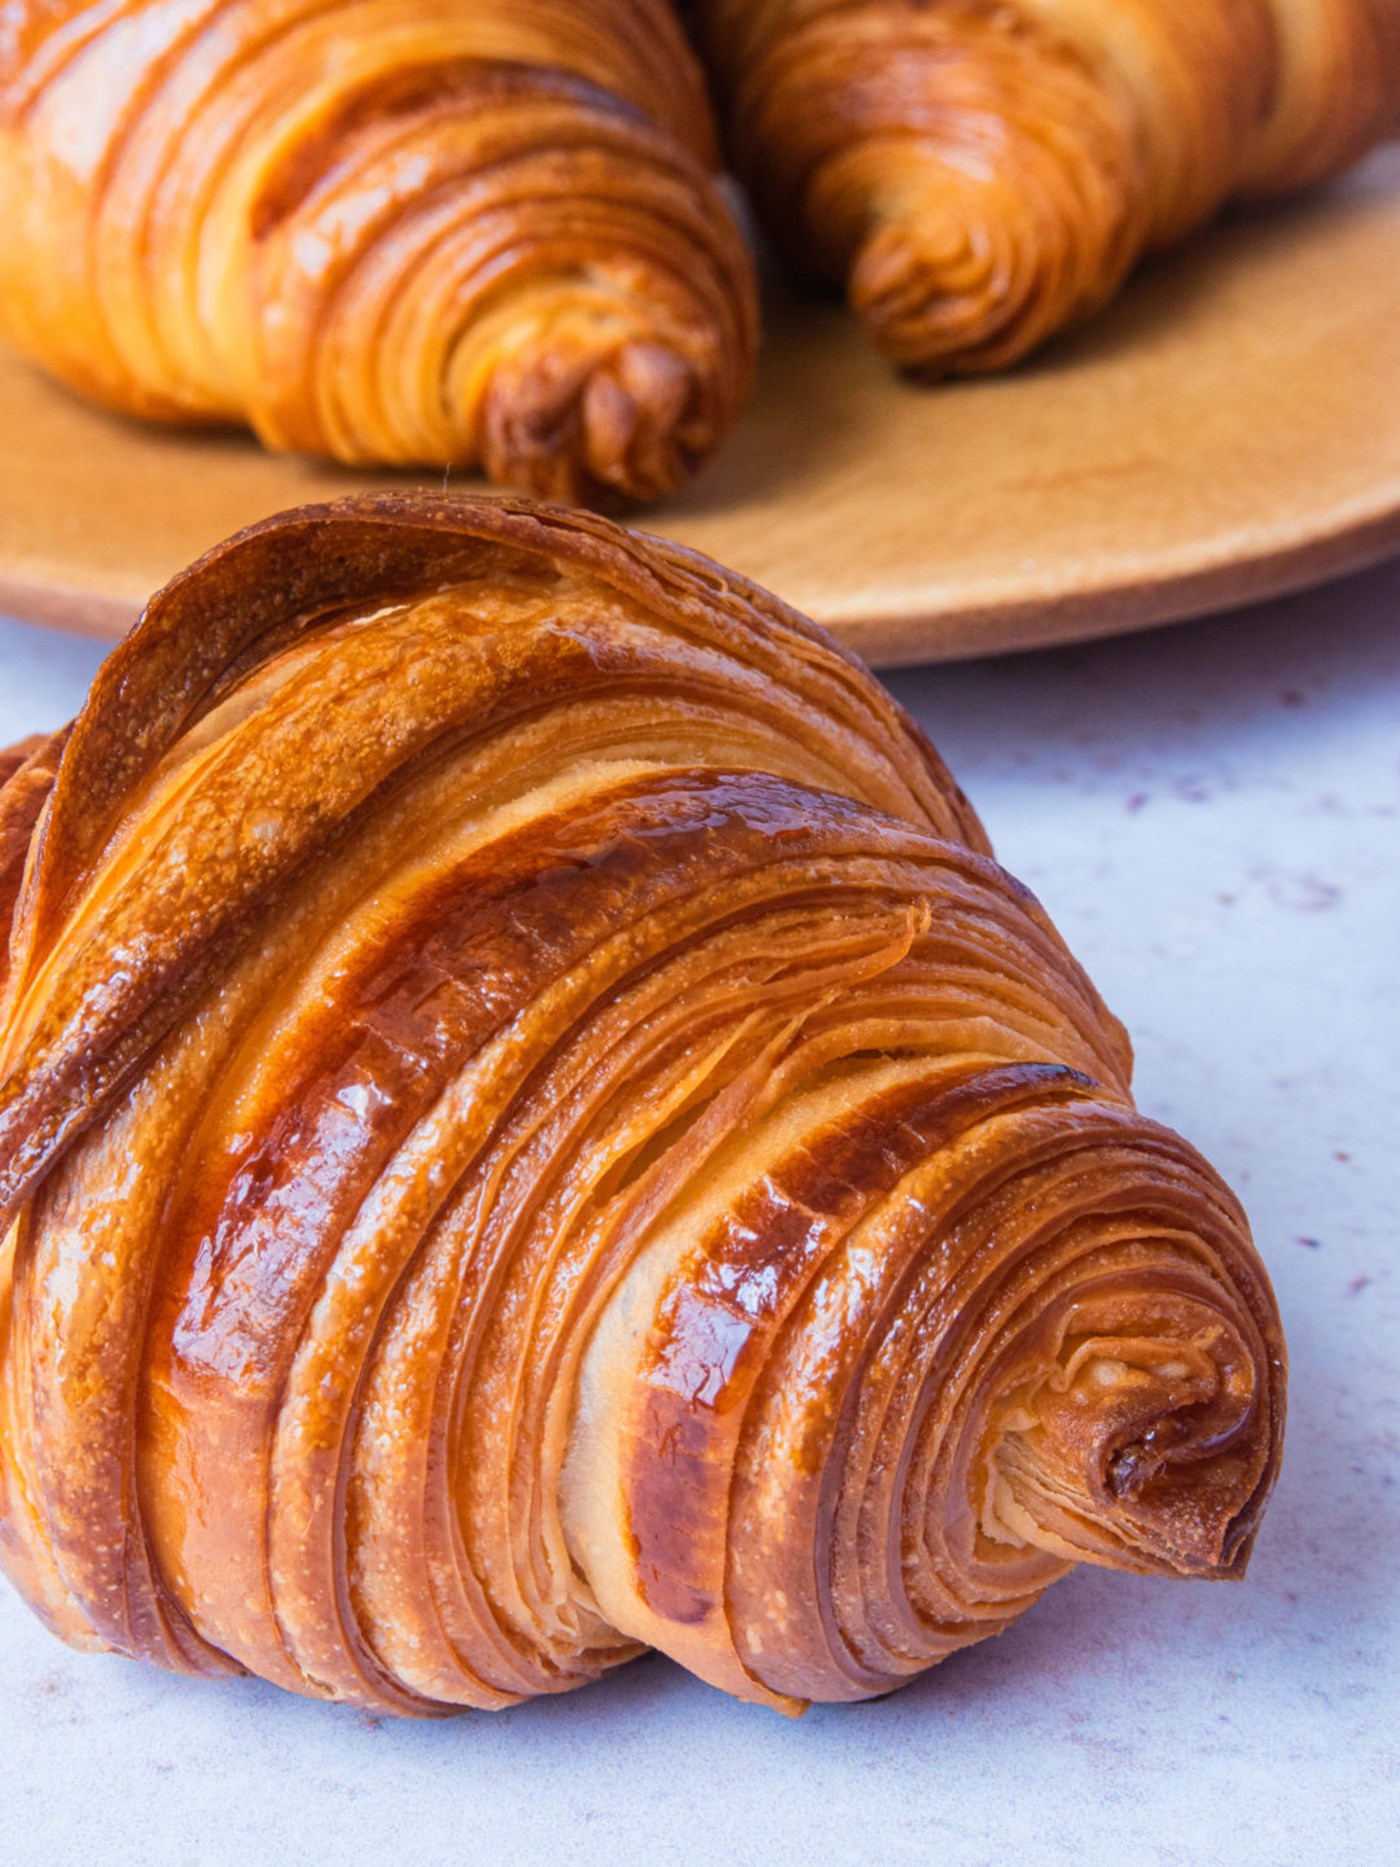 Homemade French Croissants, Baking Overseas